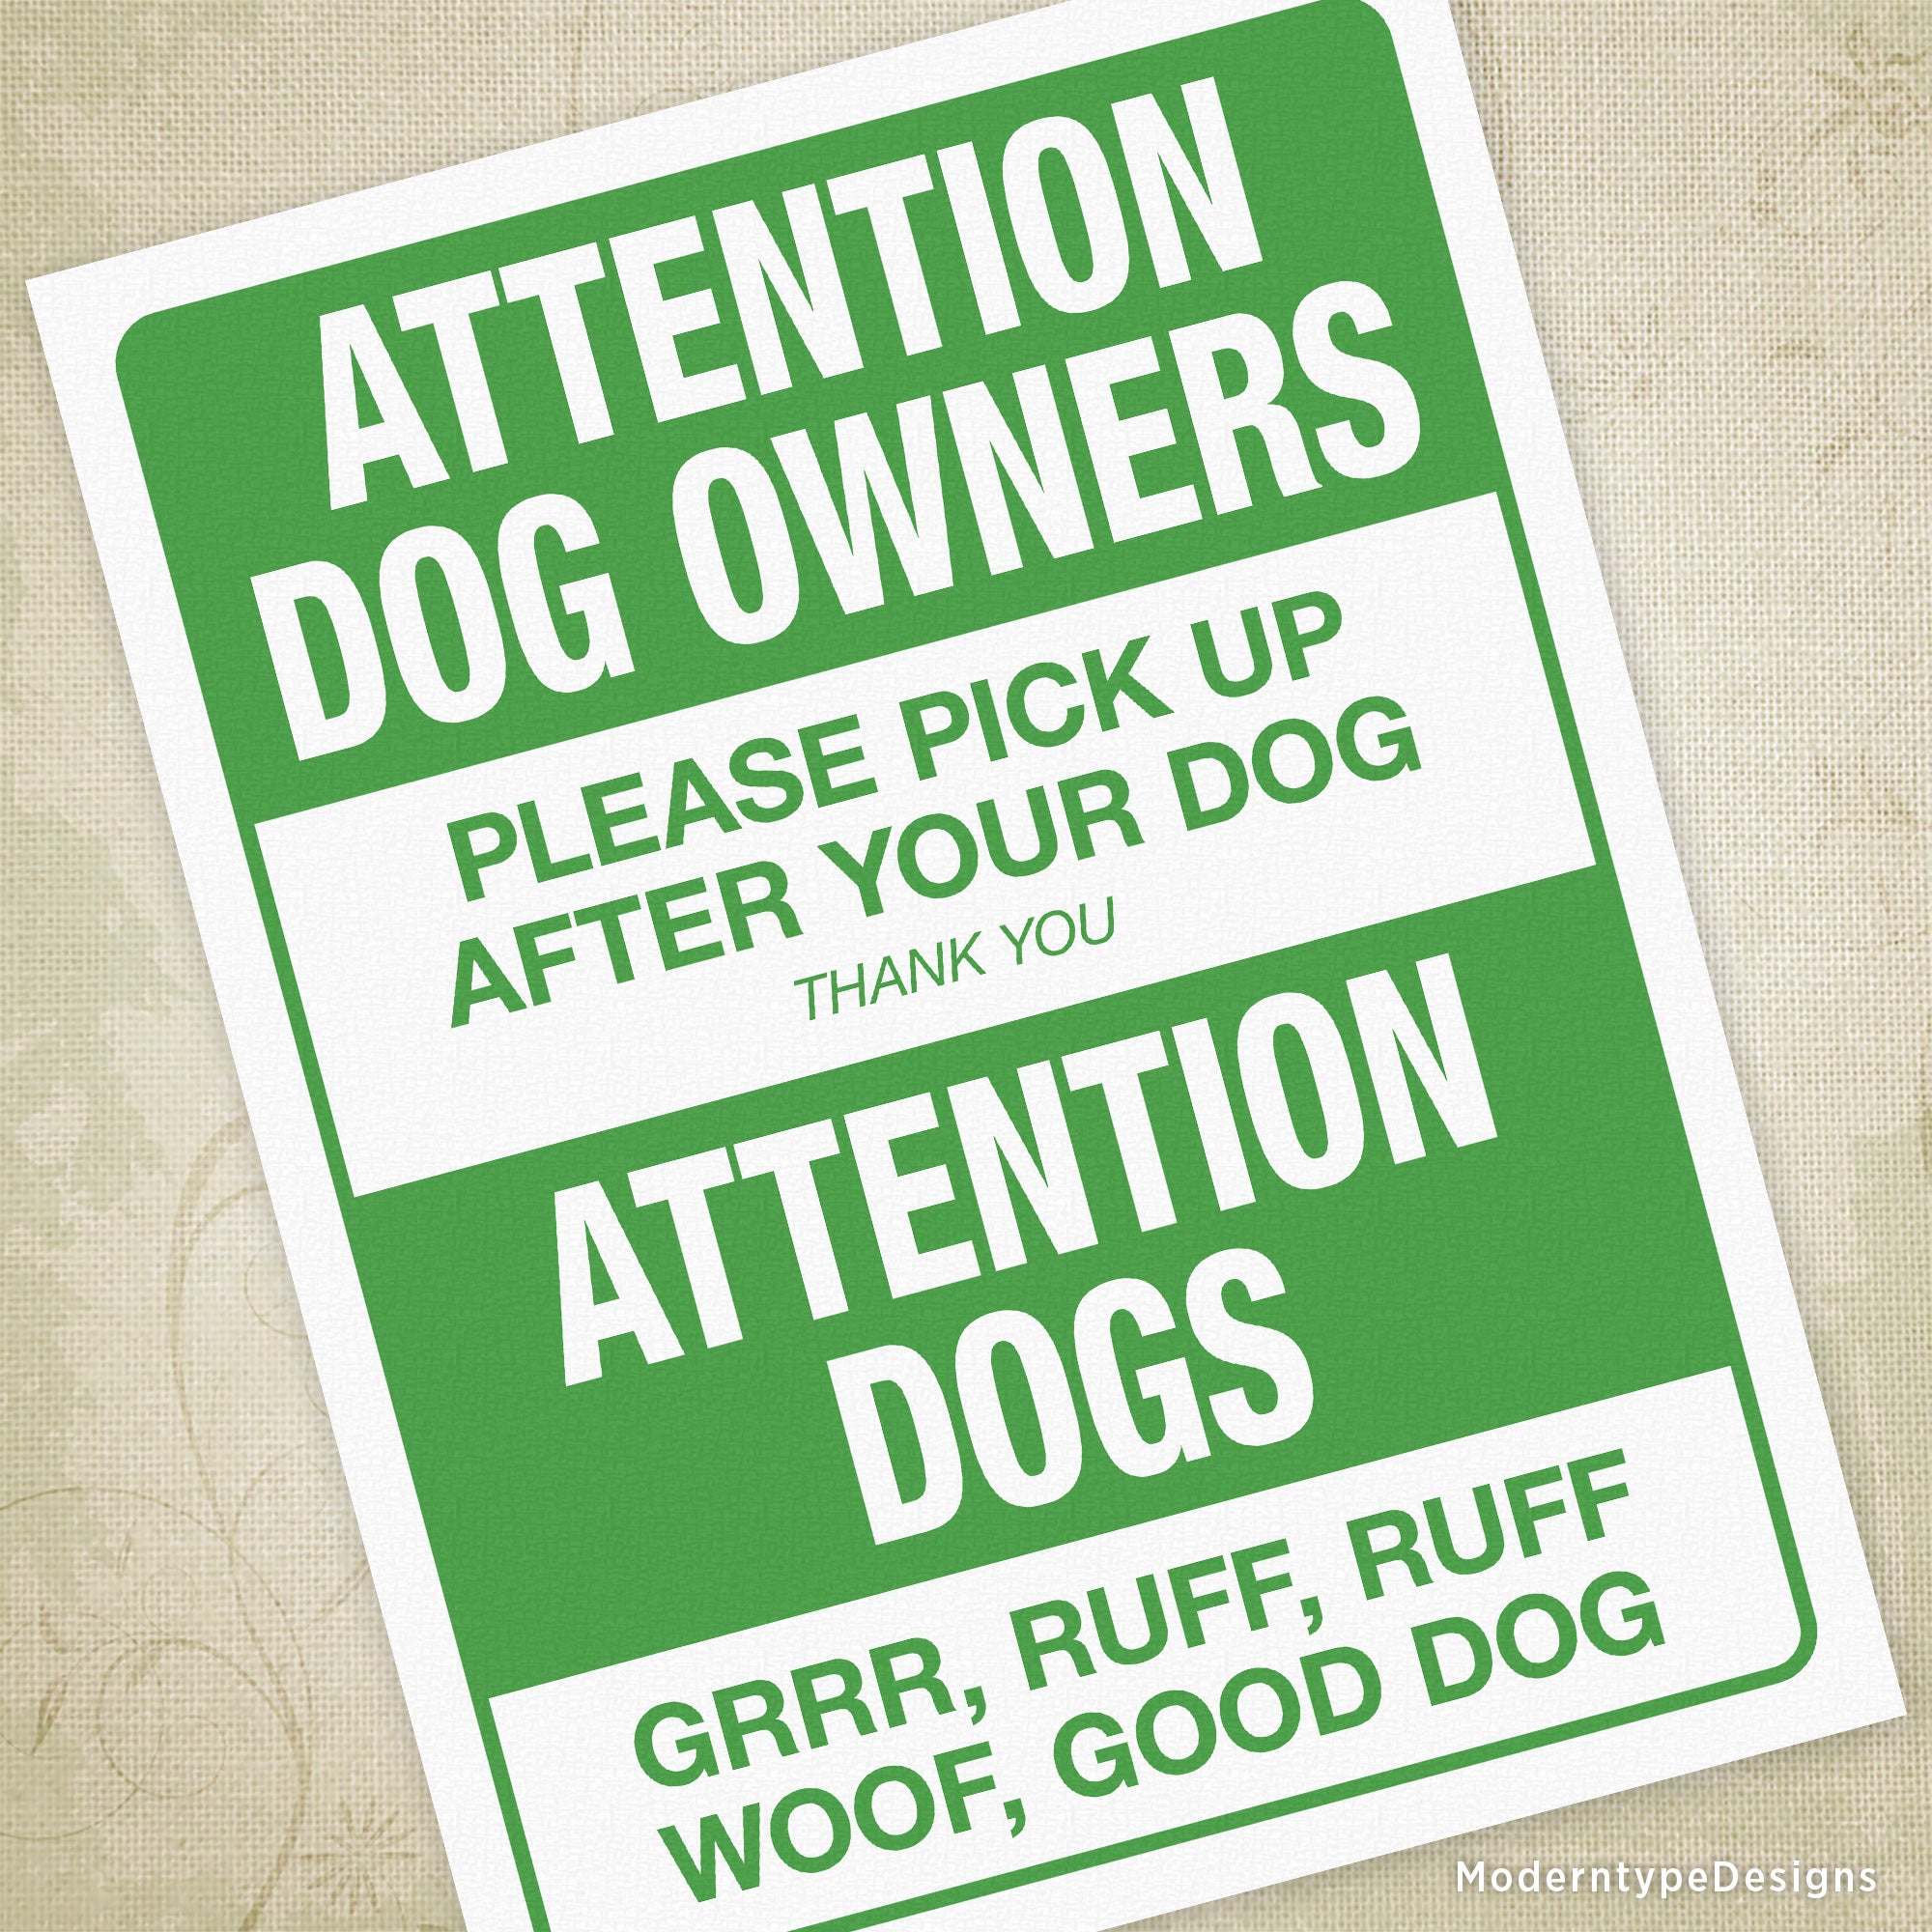 Attention Dogs and Owners Printable Sign